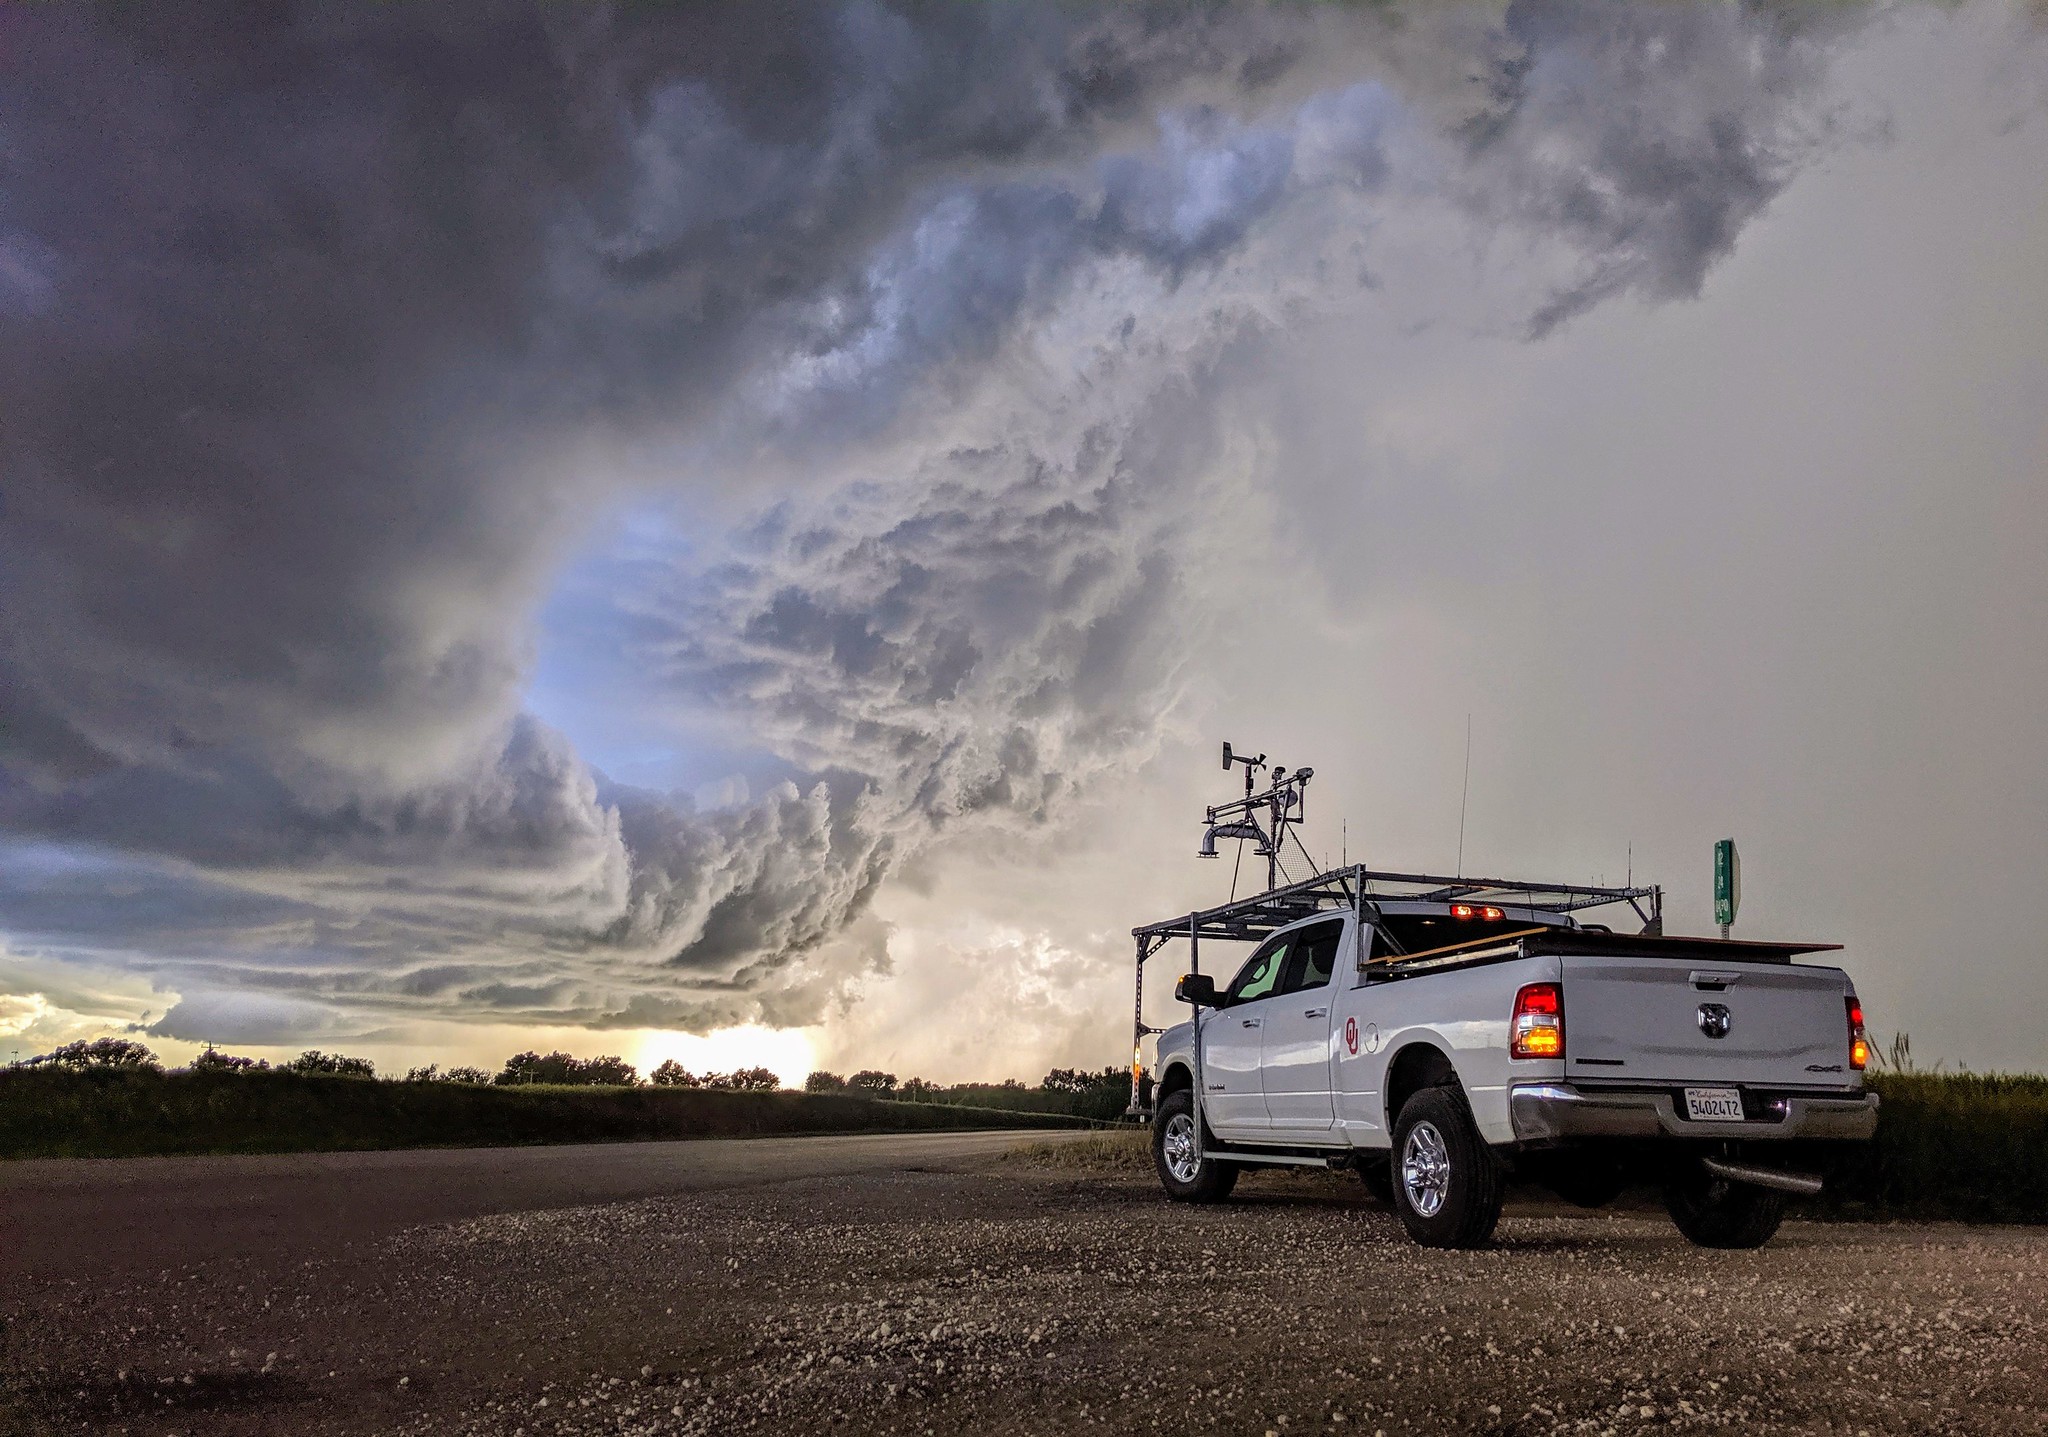 The TORUS Windsond team from the University of Oklahoma Cooperative Institute for Mesoscale Meteorological Studies supporting NOAAs National Severe Storms Laboratory. The team is near the hail core of a storm in May 2019. (Photo by Christiaan Patterson, OU CIMMS/NOAA NSSL)